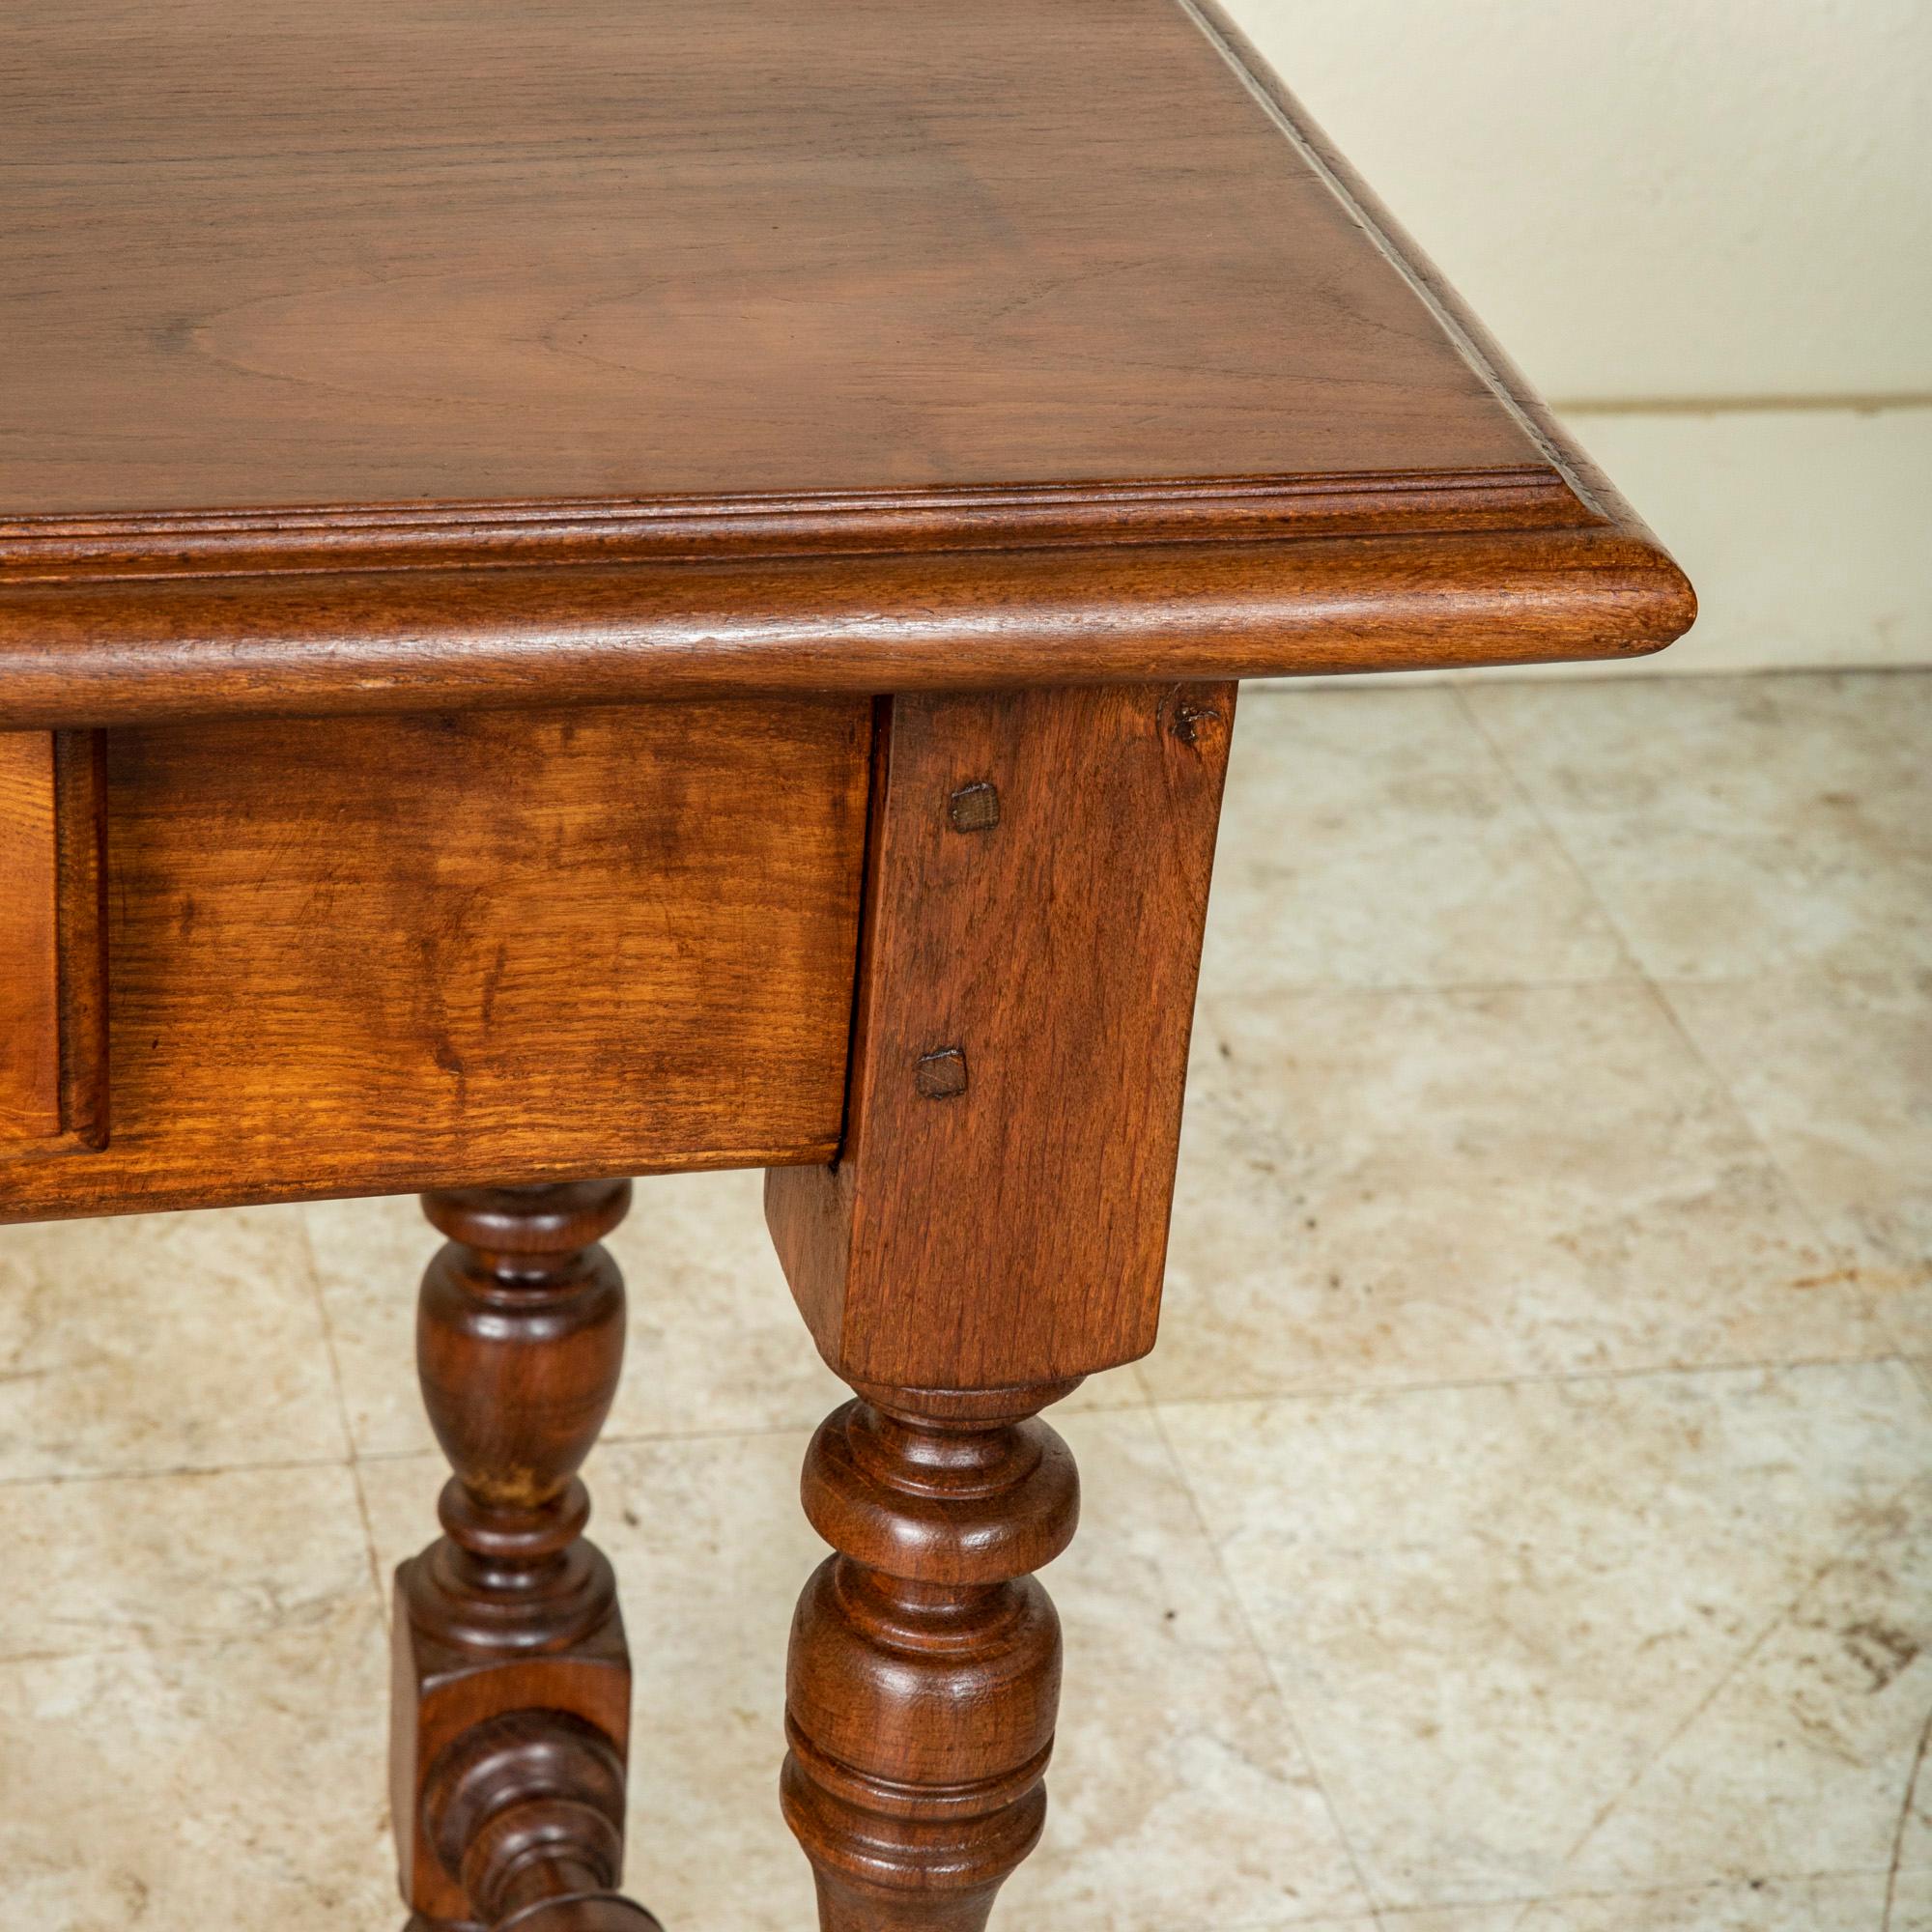 Late 19th Century French Henri II Style Walnut Writing Table or Desk with Drawer For Sale 6